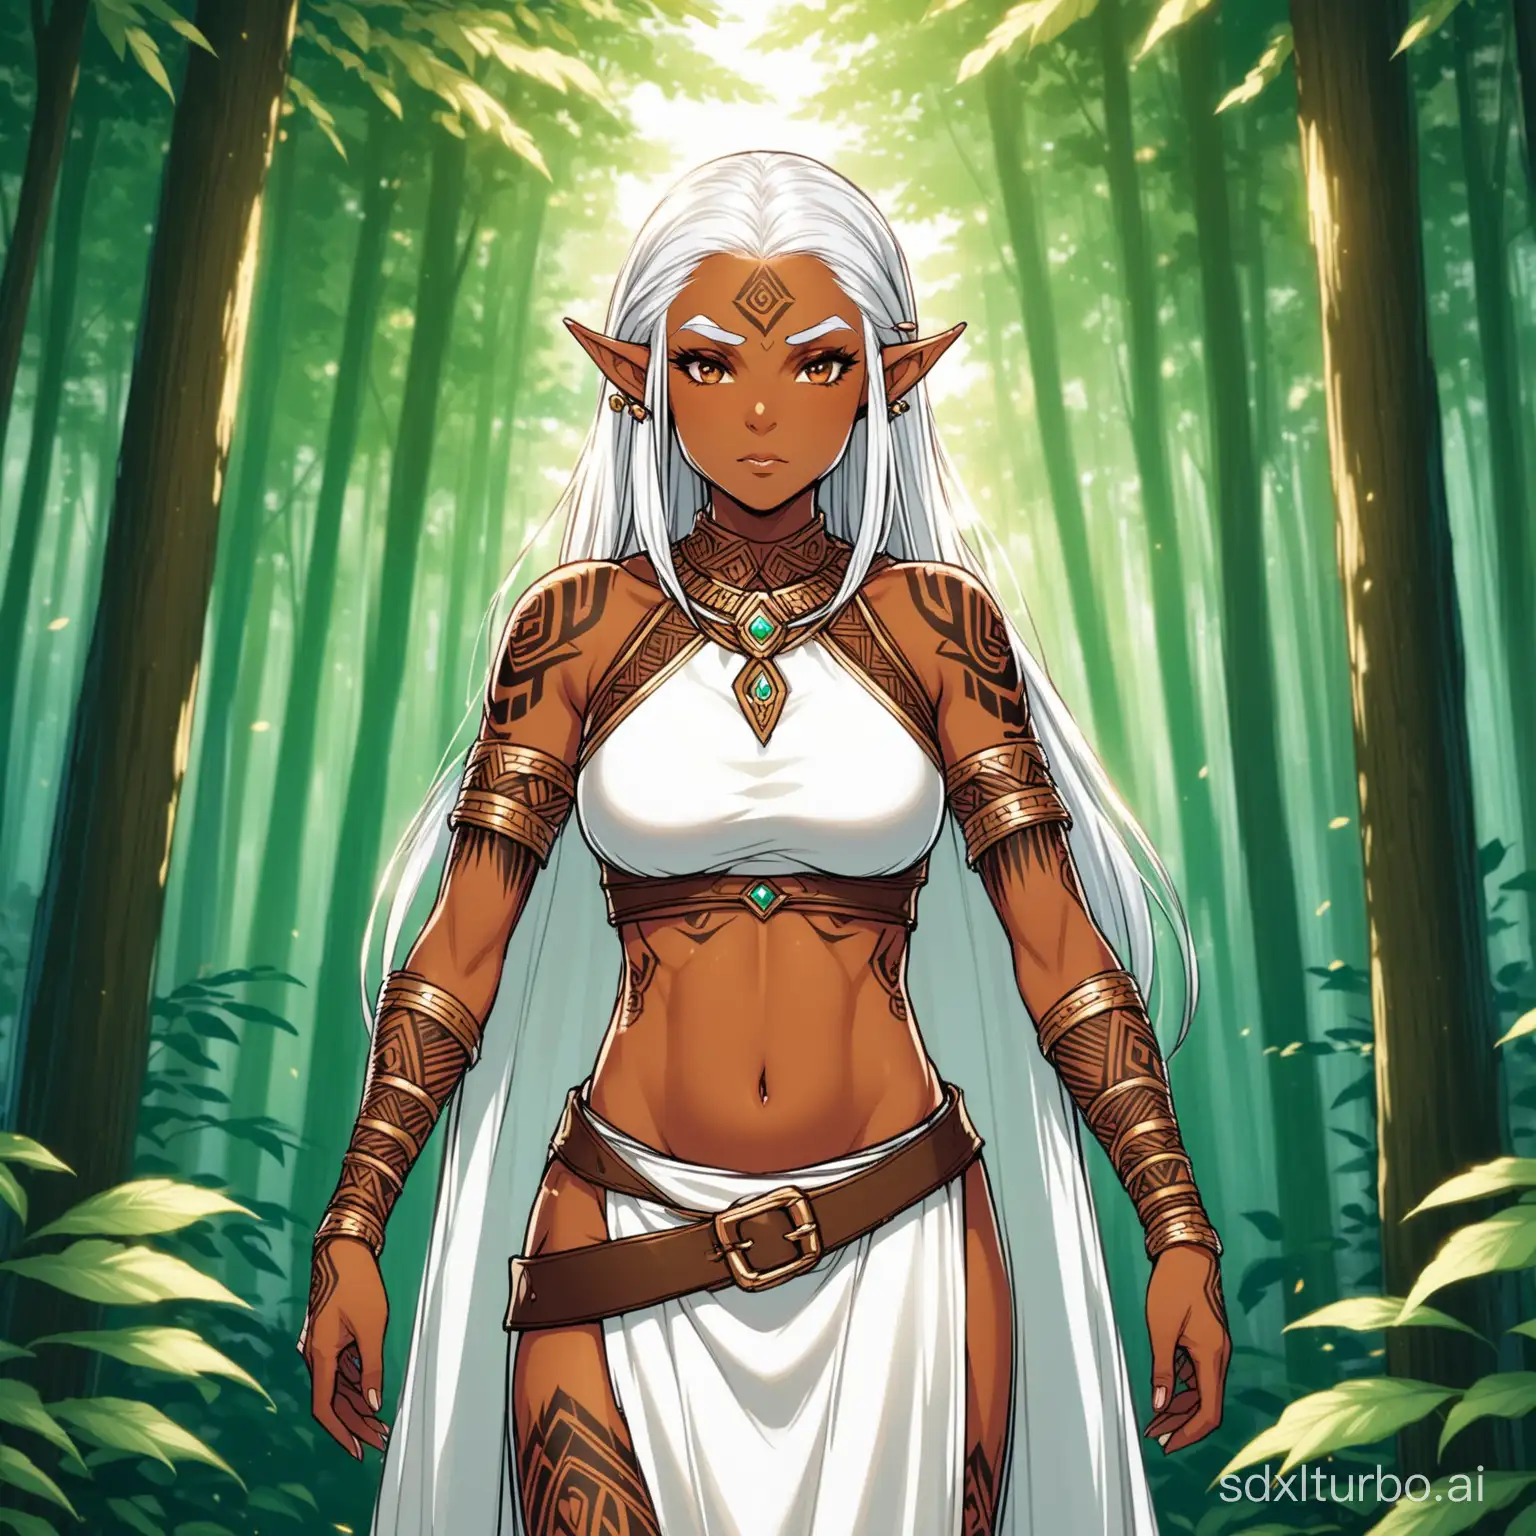 Serious-Tall-Elf-Woman-in-Forest-with-Tribal-Tattoos